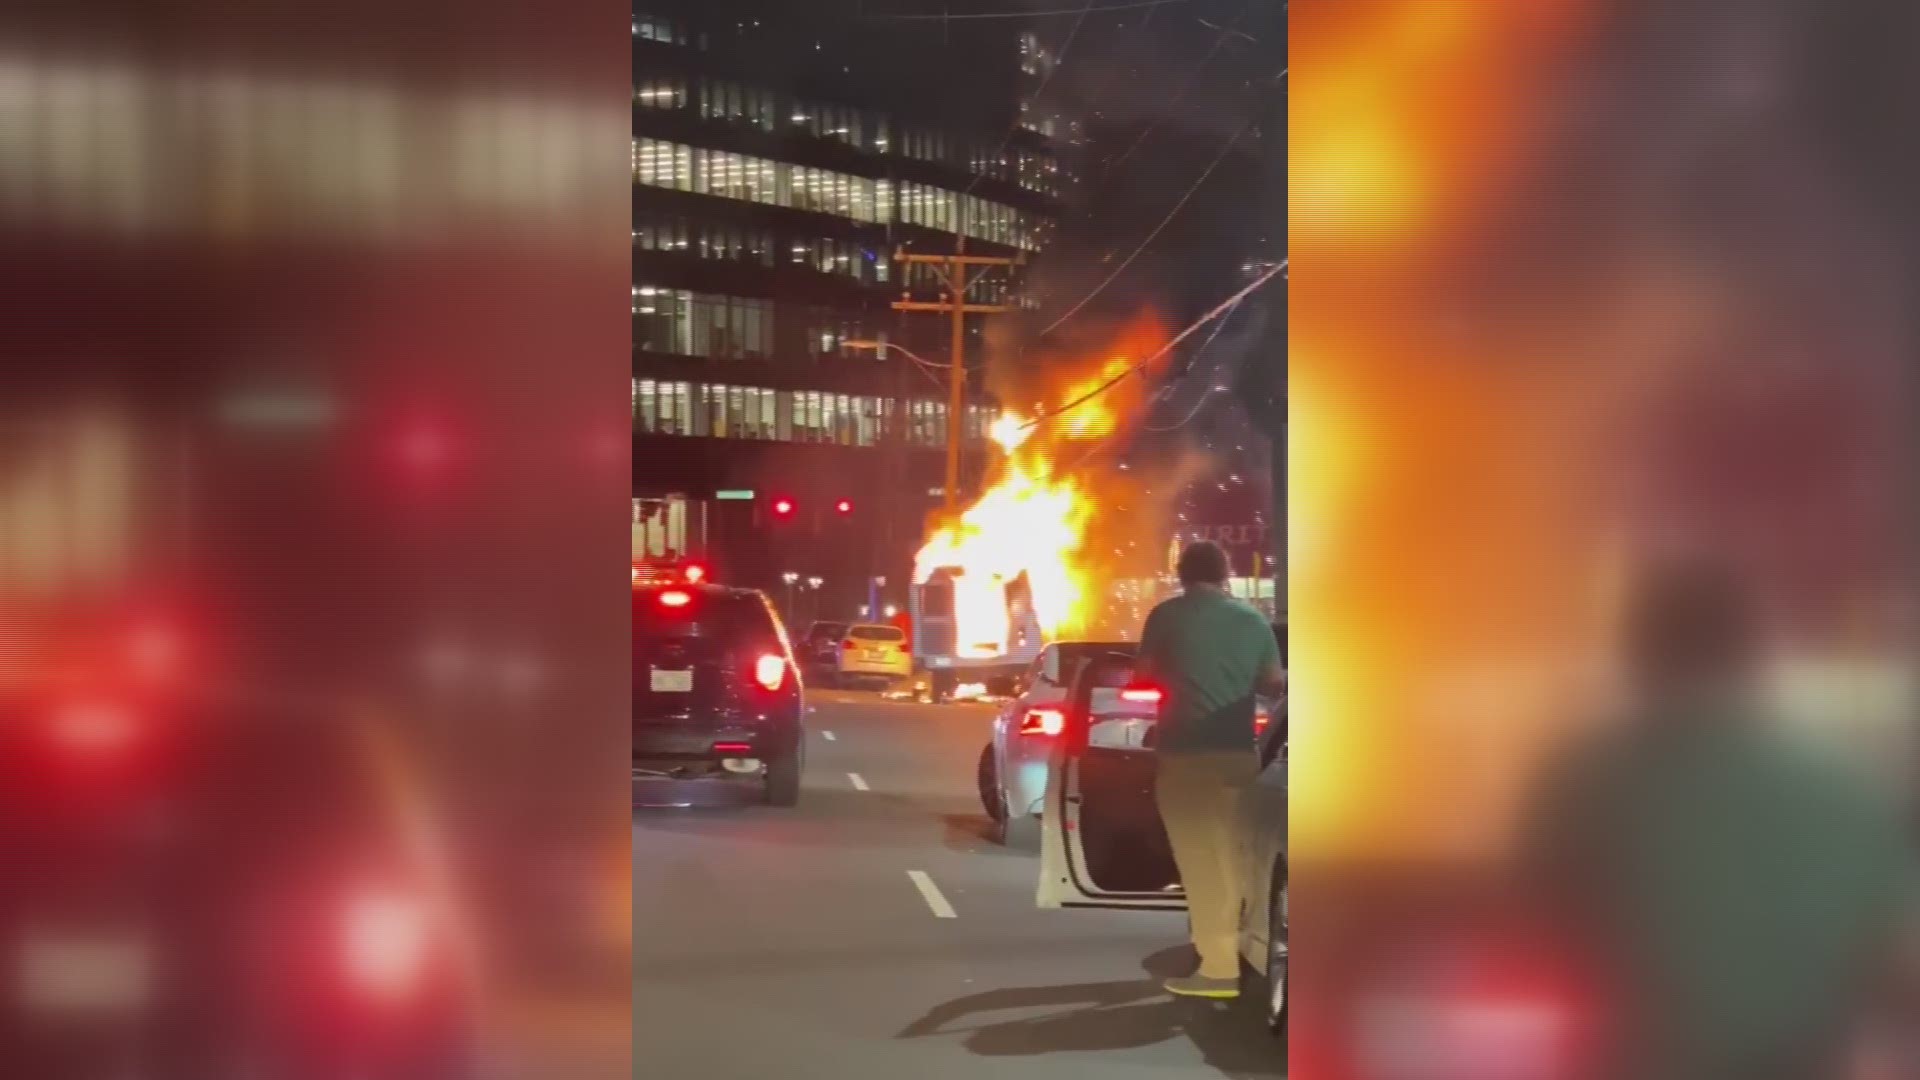 Witnesses captured video as a food truck fire led to an explosion in South End, Charlotte.